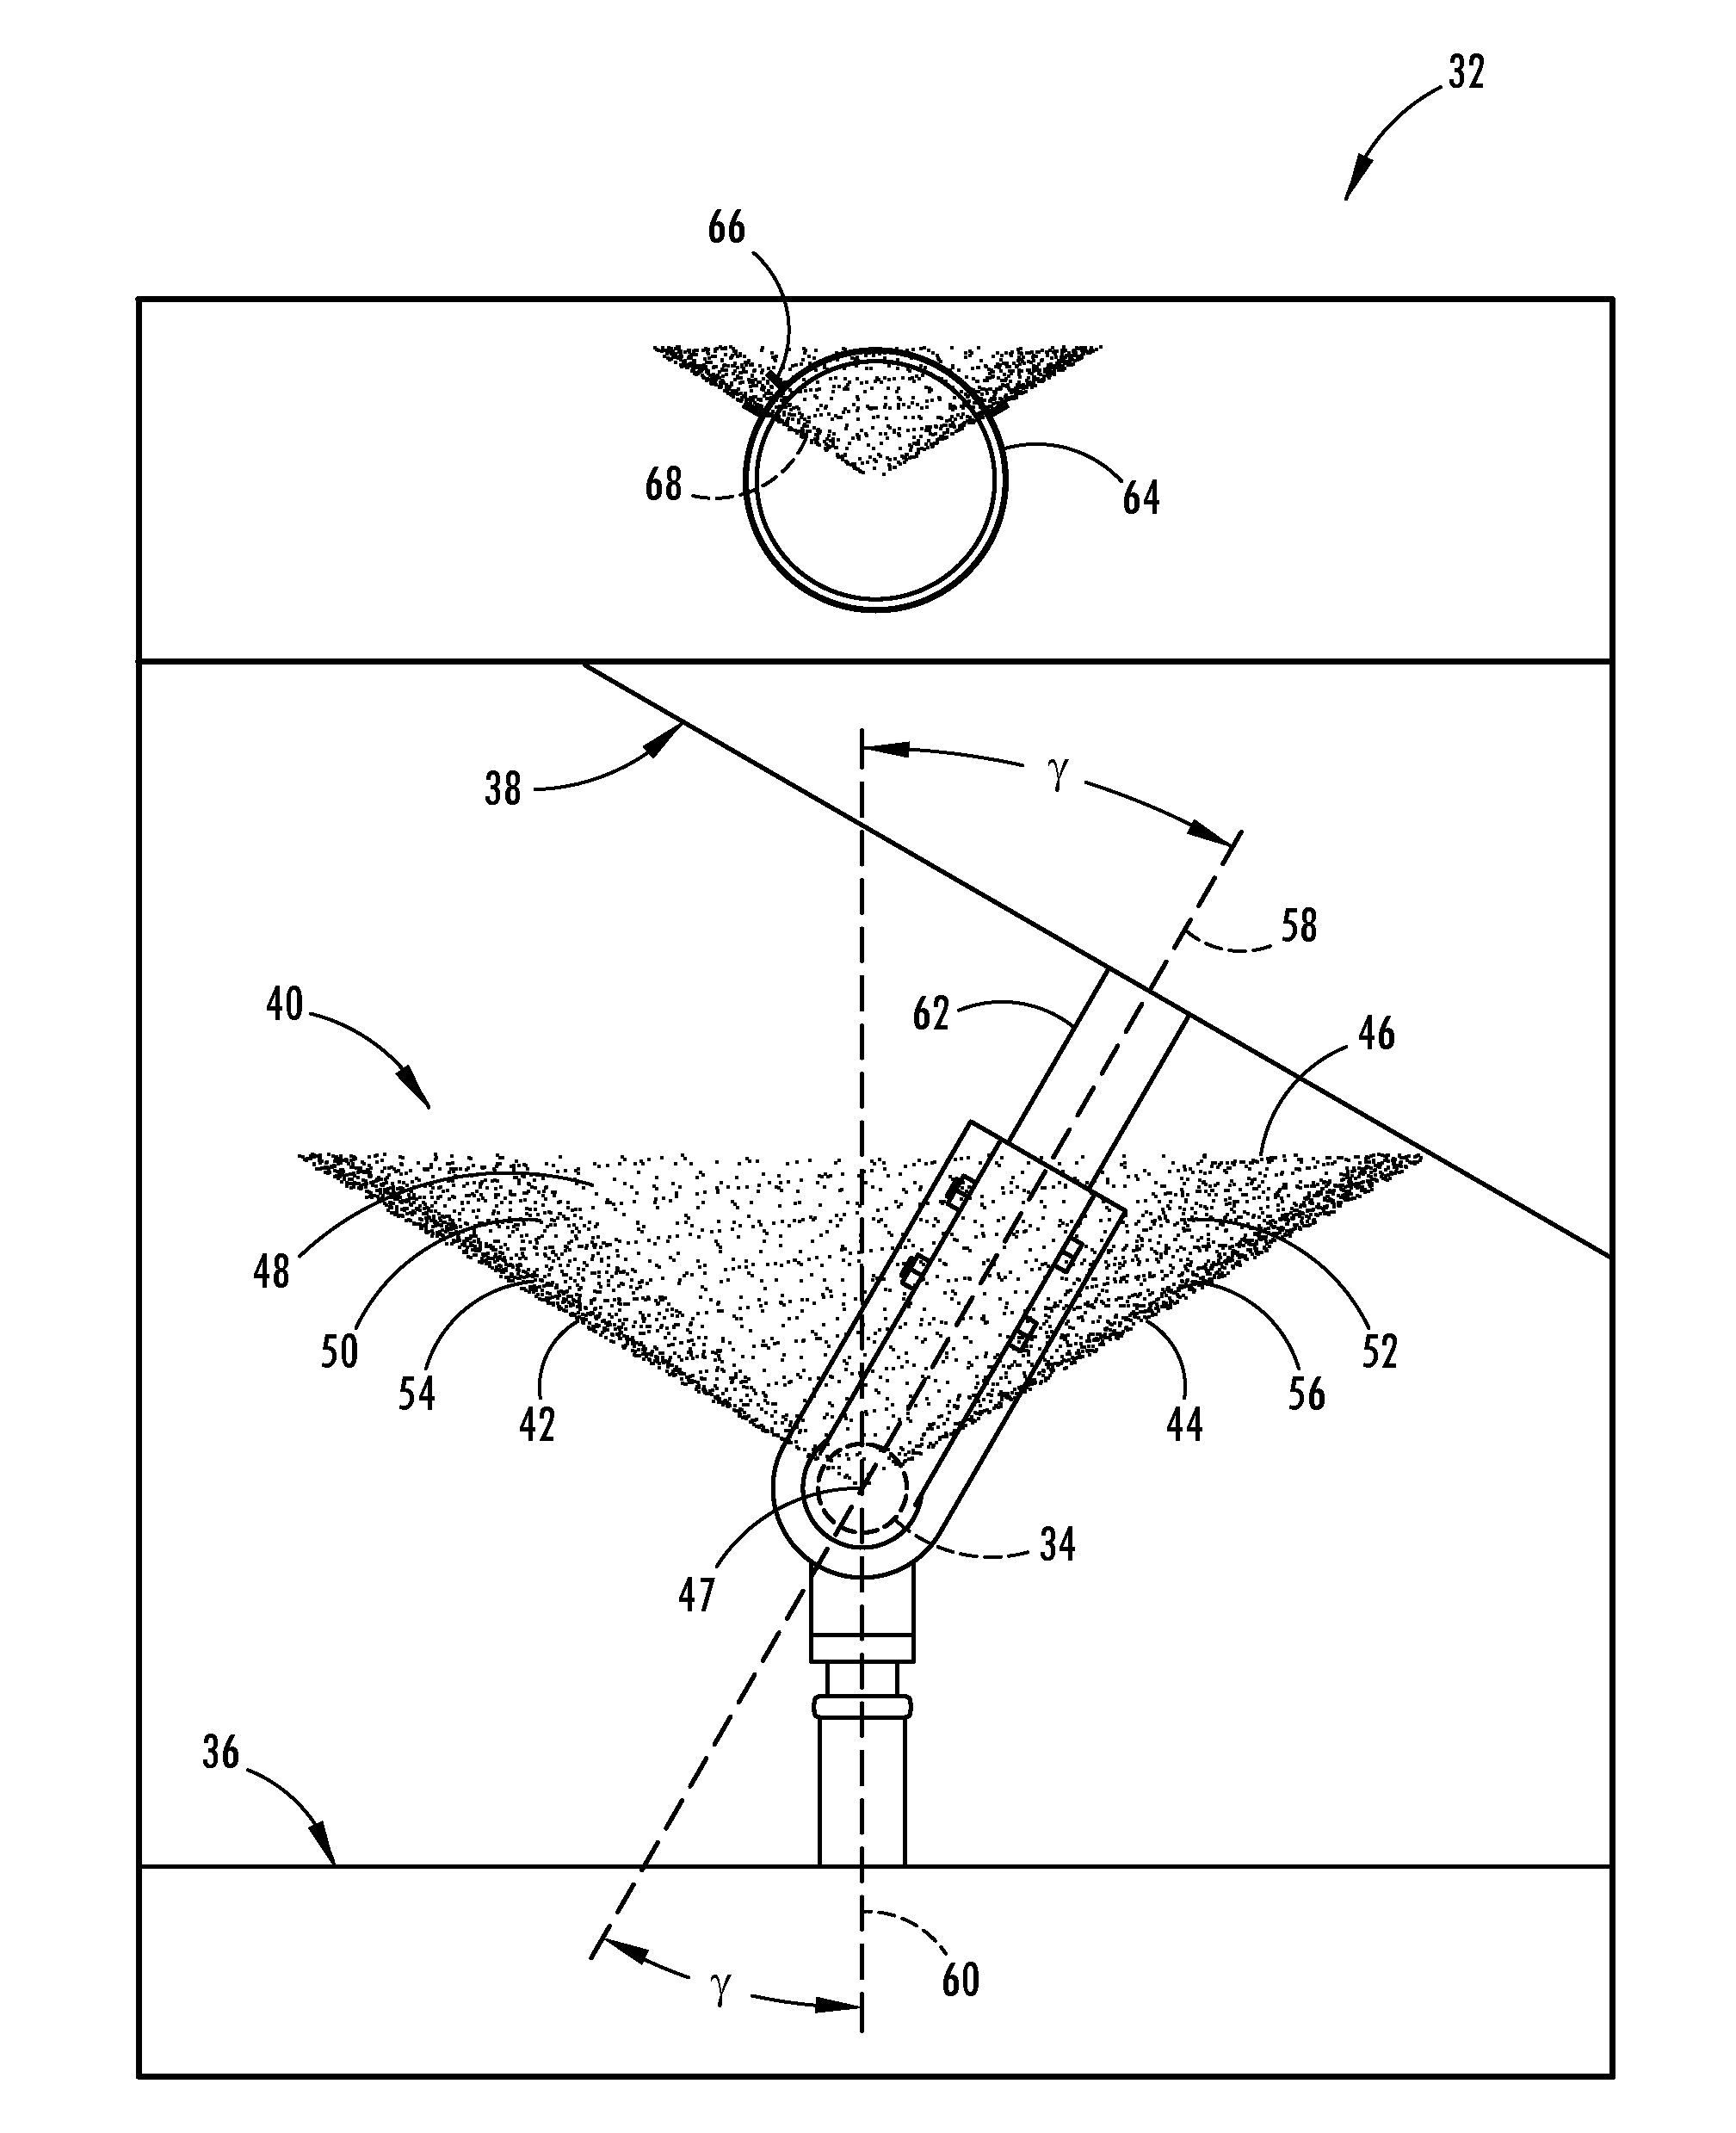 Hitch angle monitoring system and method